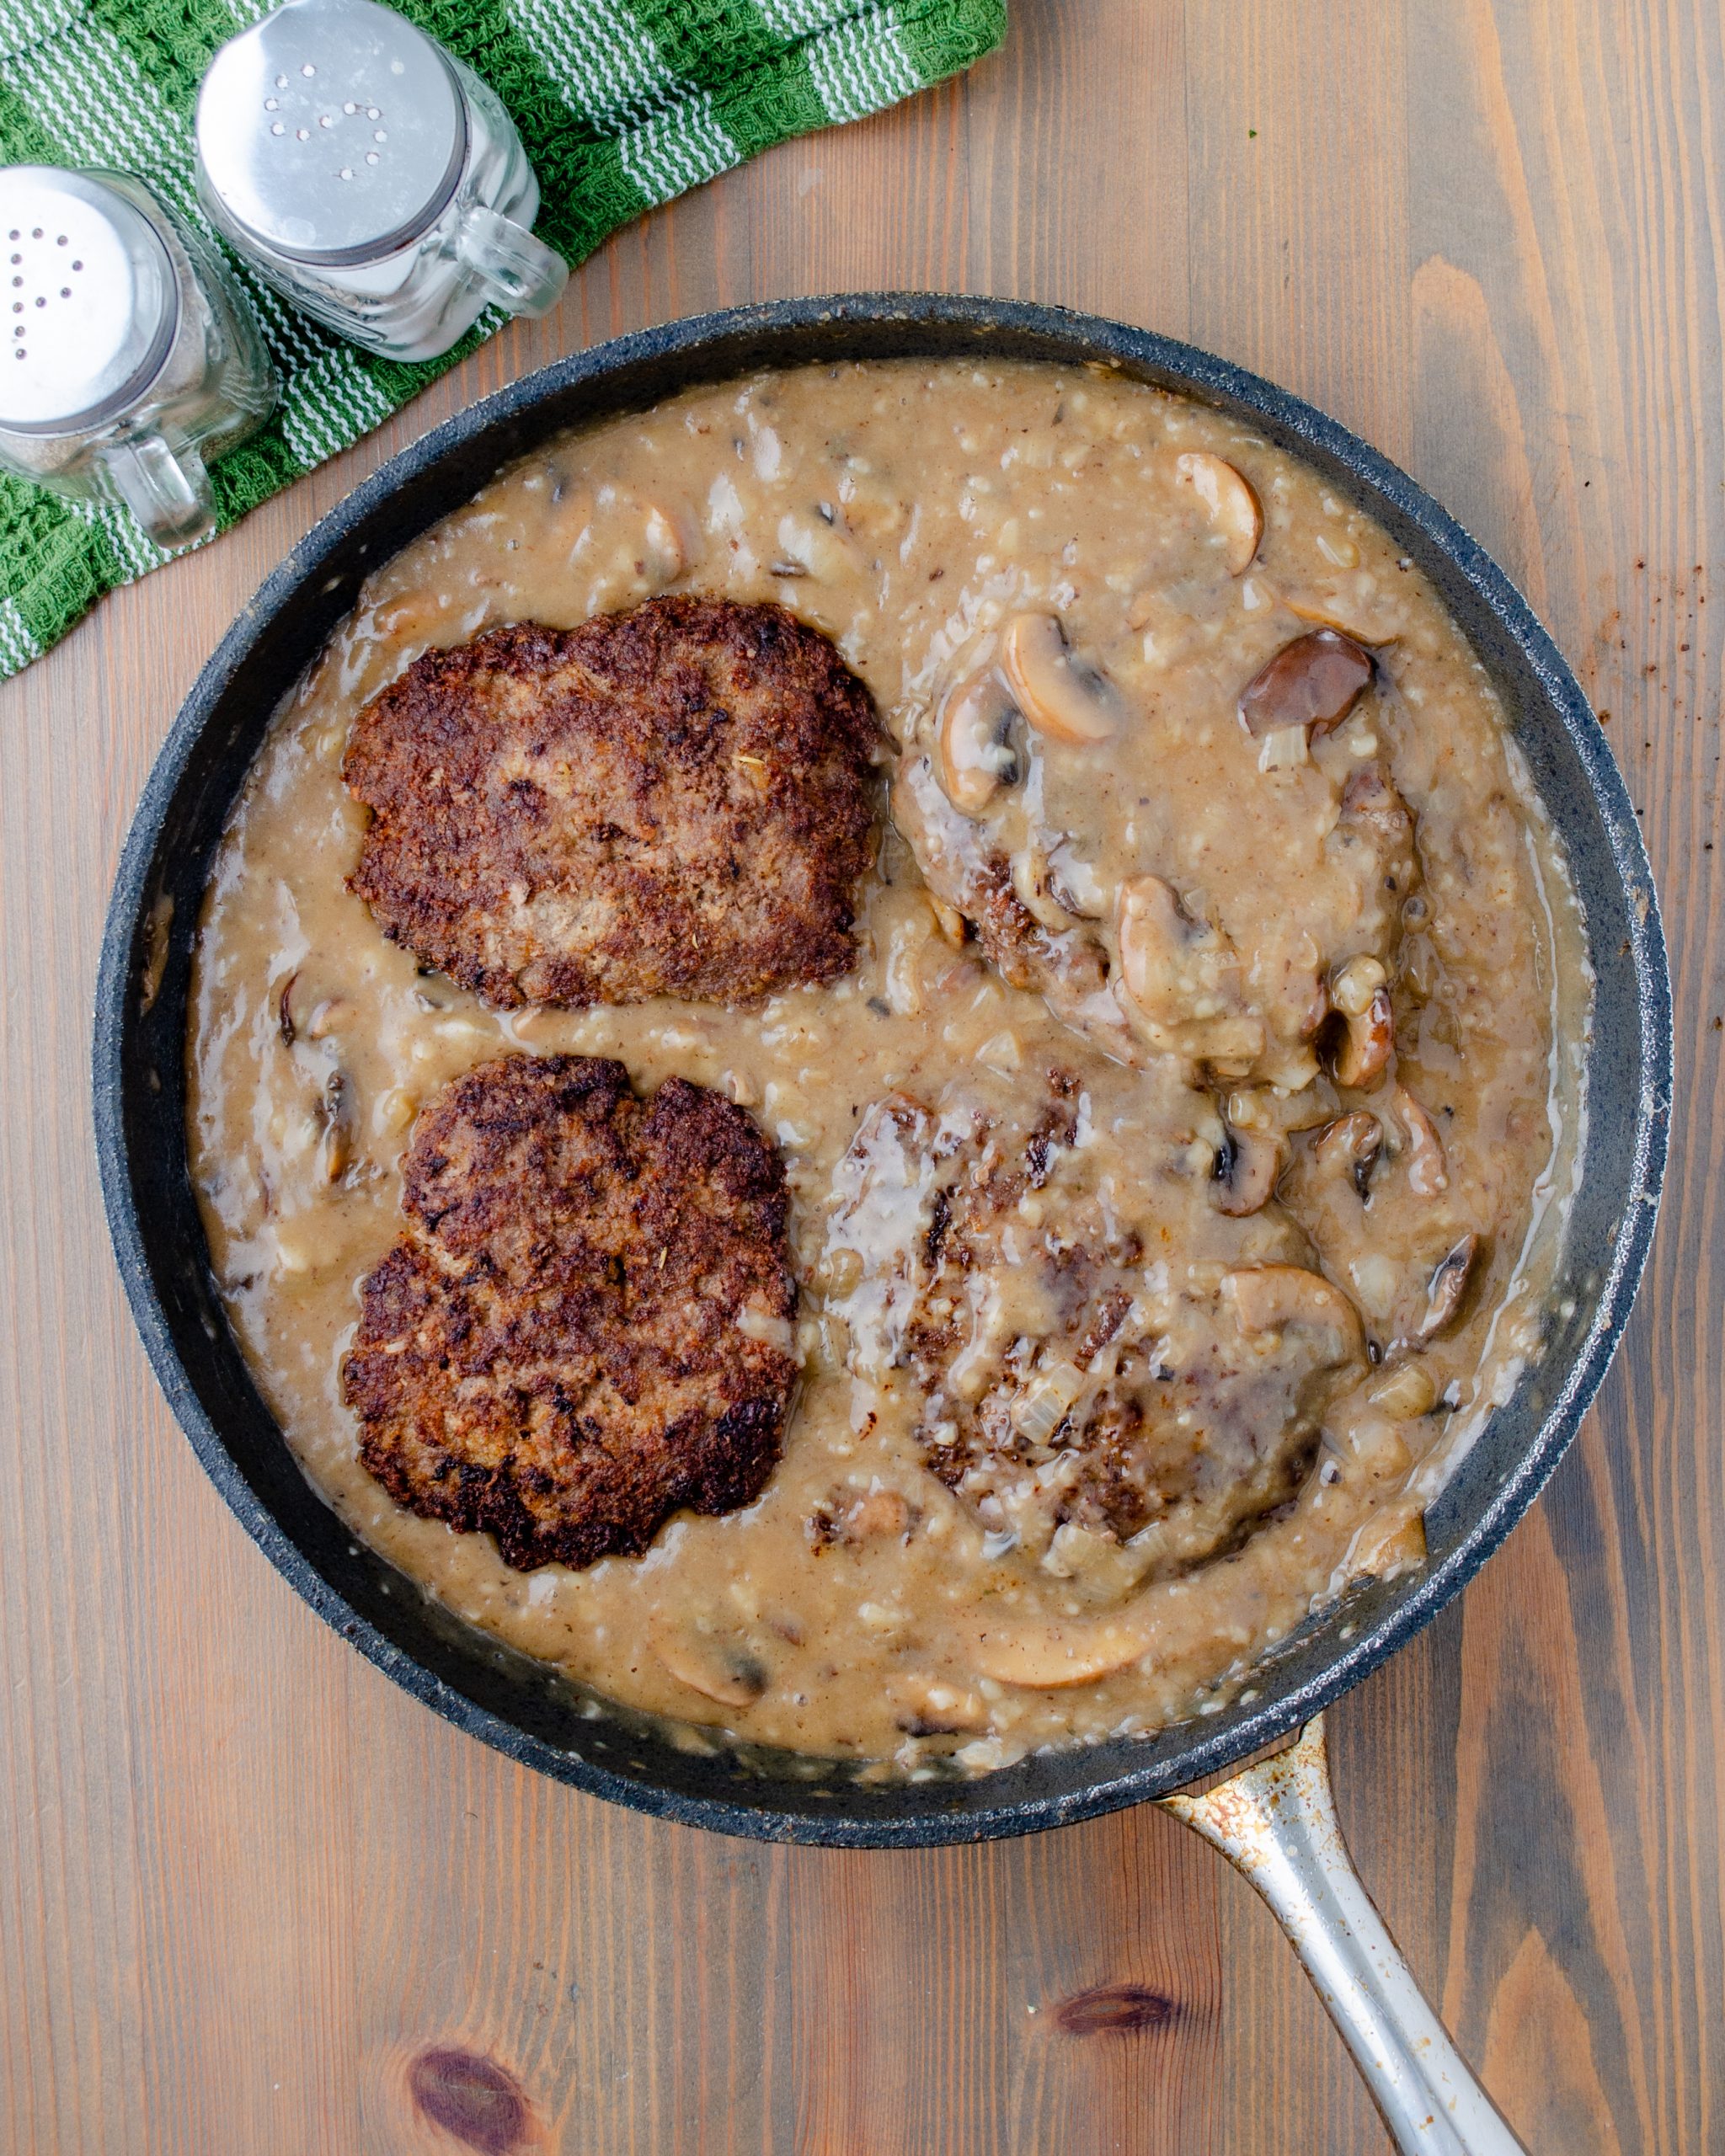 Place the Salisbury steak patties back in the pan with the gravy and cook for about 5 to 10 minutes.